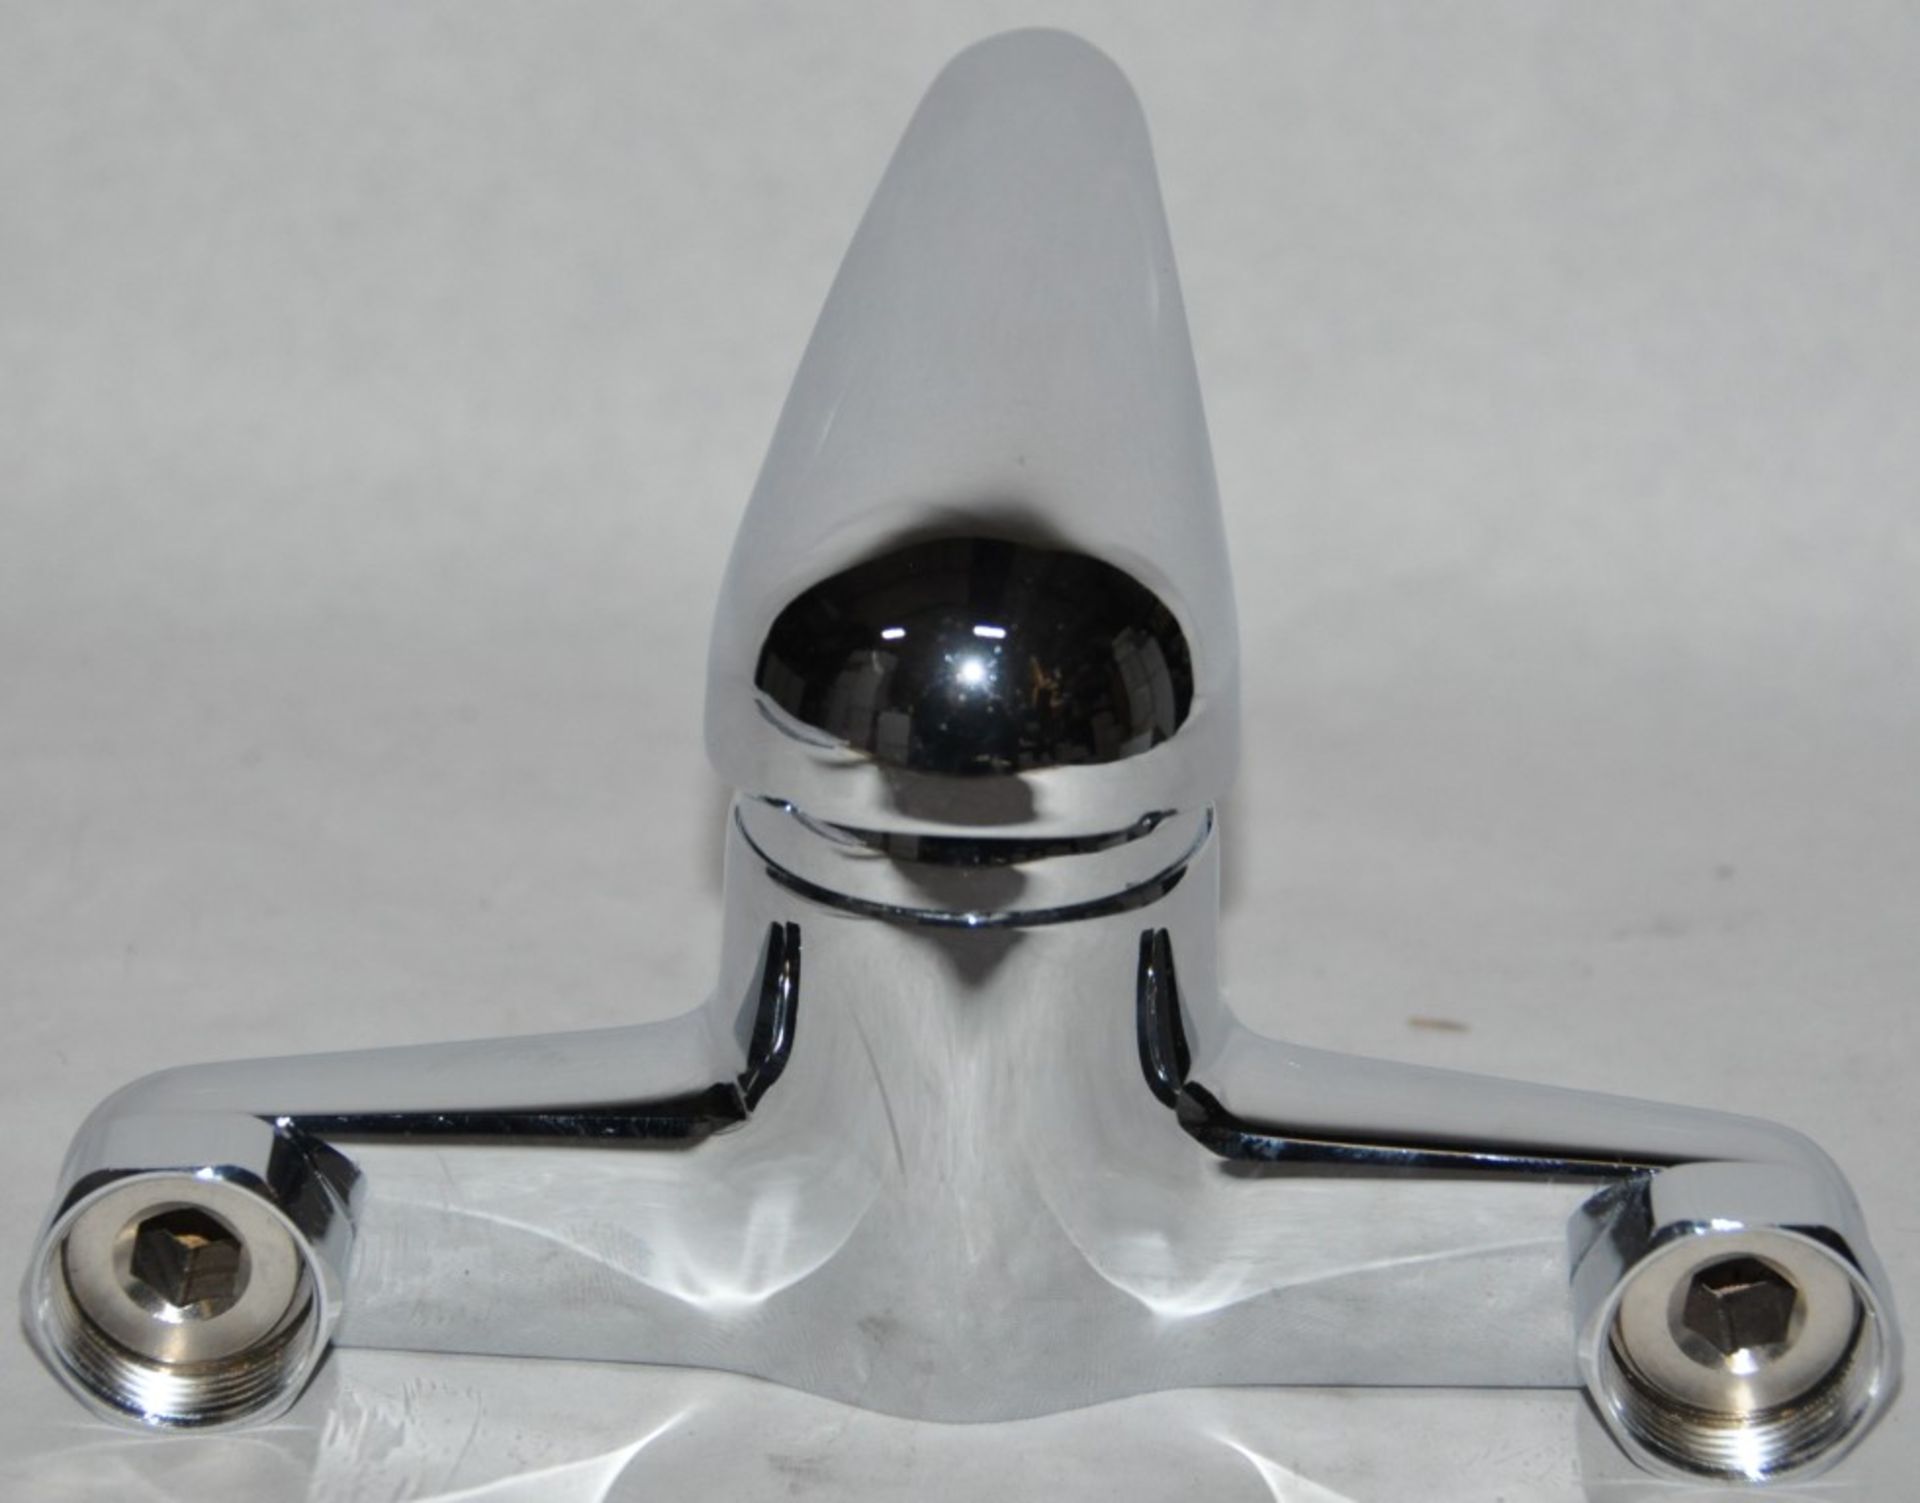 1 x Chrome Bath Filler – Used Commercial Samples - Boxed in Good Condition – Complete – Model : - Image 2 of 6